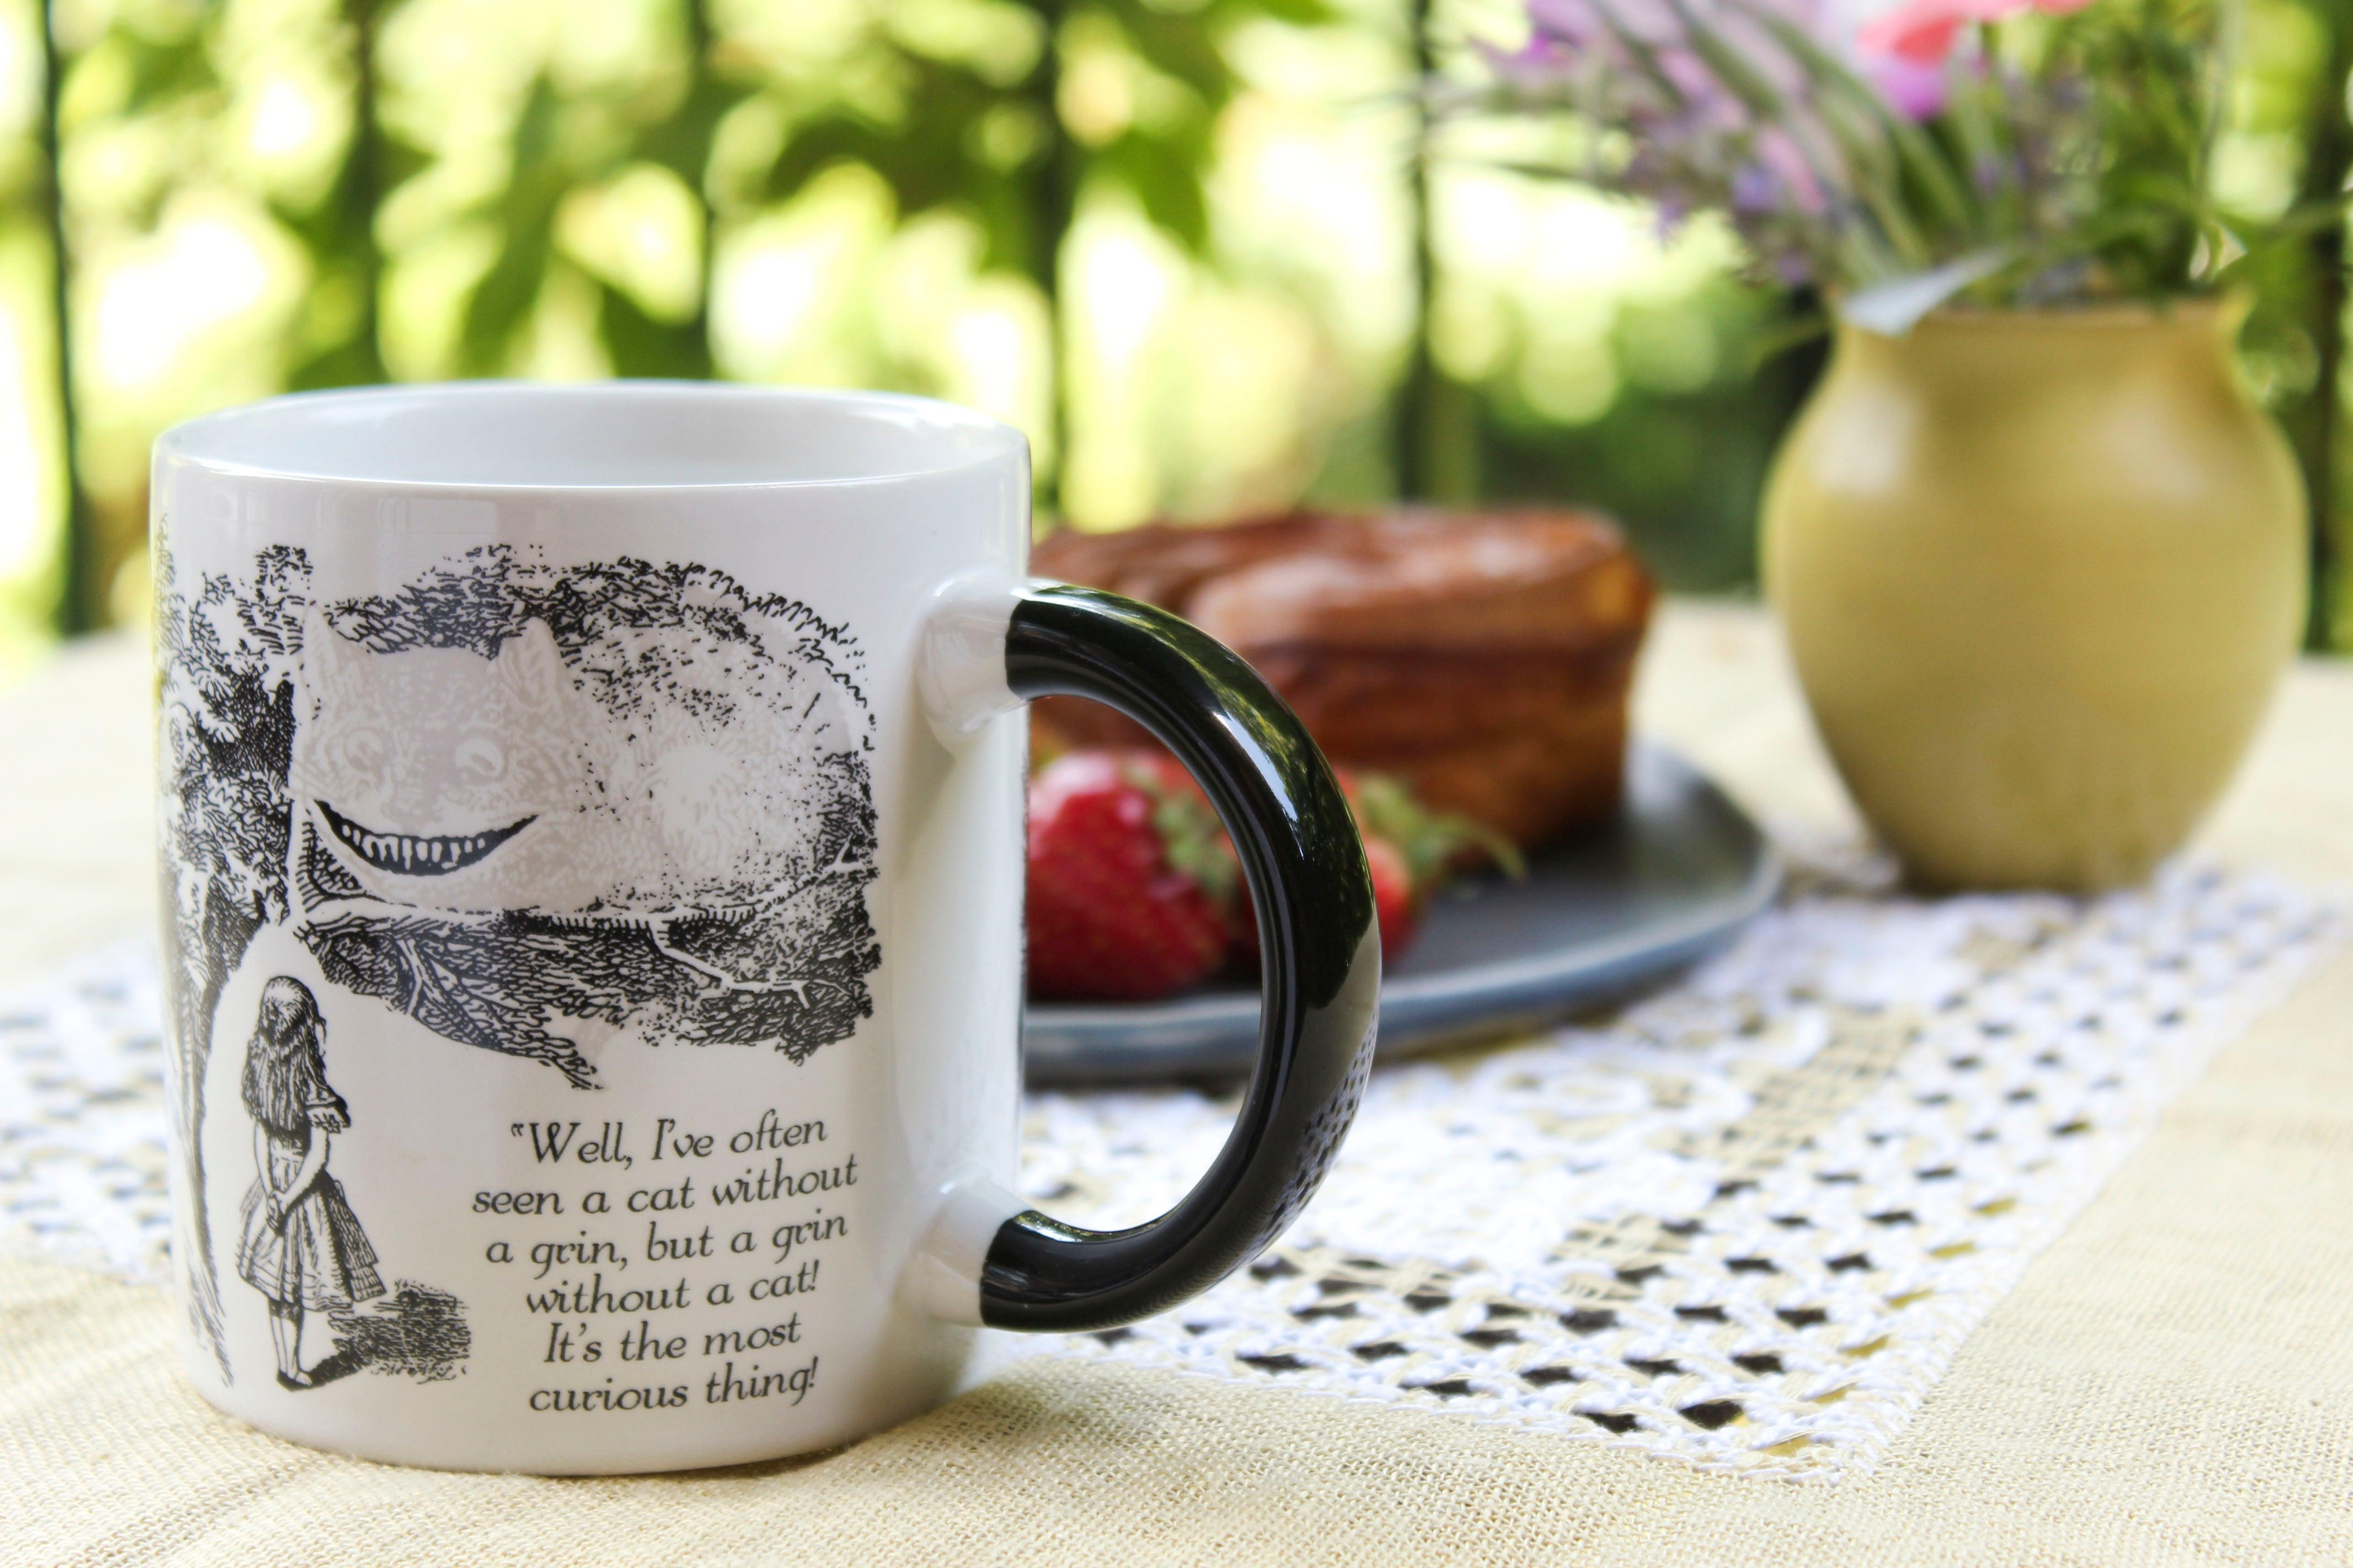 Product photo of Cheshire Cat Heat-Changing Mug, a novelty gift manufactured by The Unemployed Philosophers Guild.